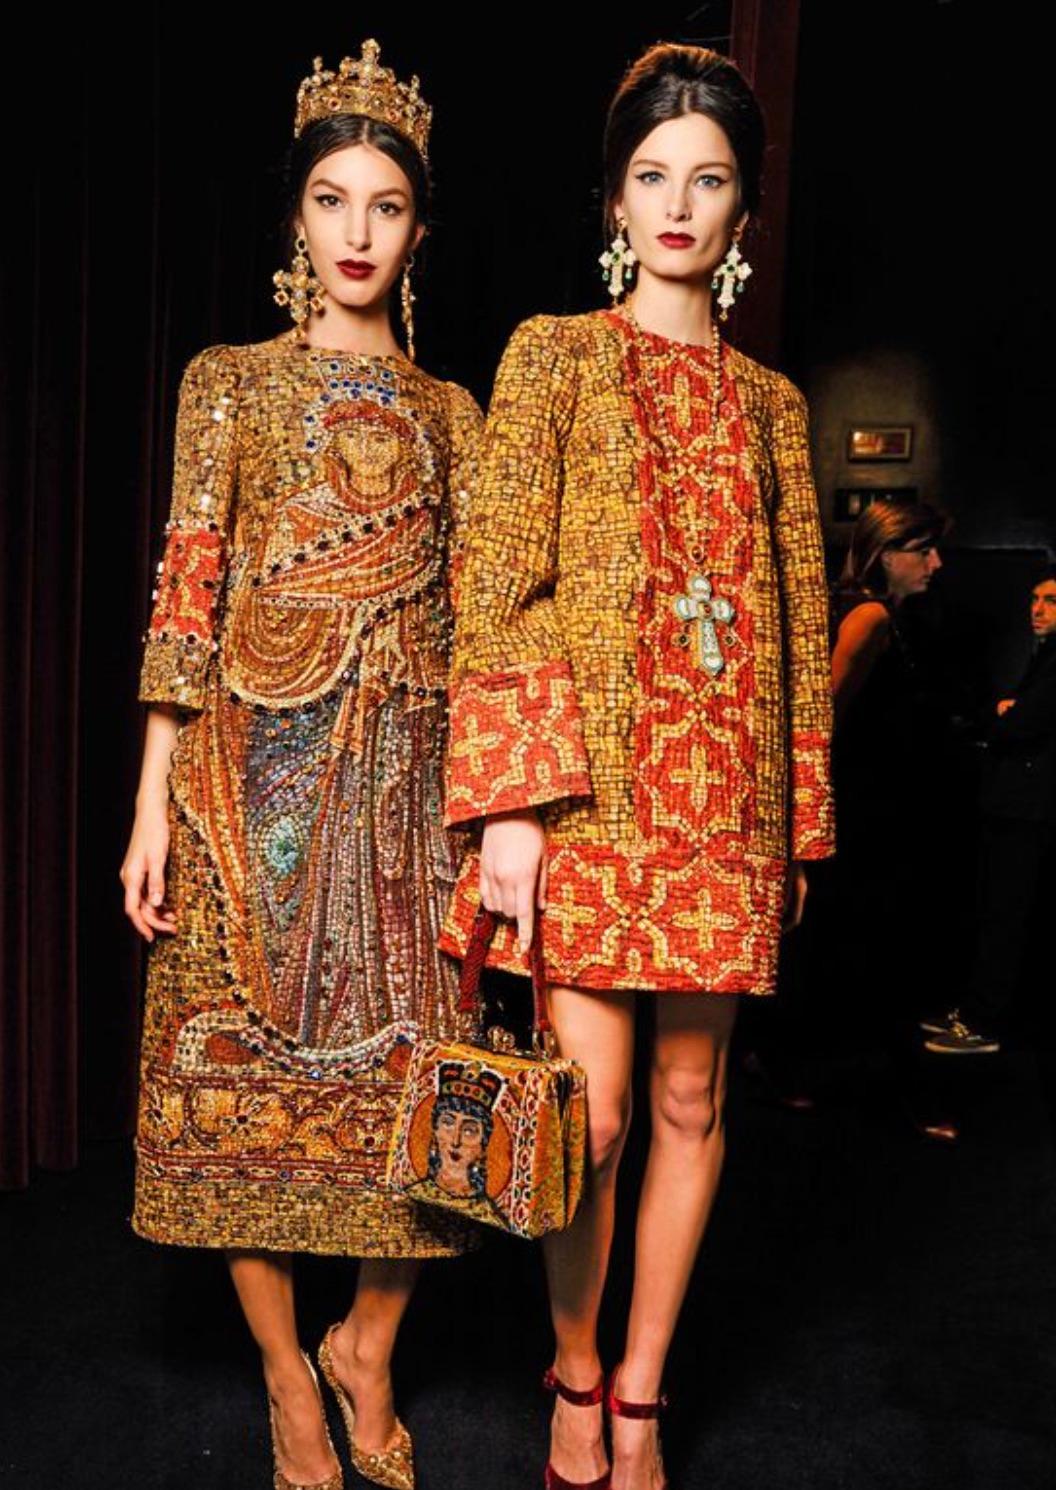 Dolce&Gabbana Fall/Winter 2013 Byzantine Runway Mosaic Gold Red Cross Dress In Excellent Condition For Sale In Jersey City, NJ